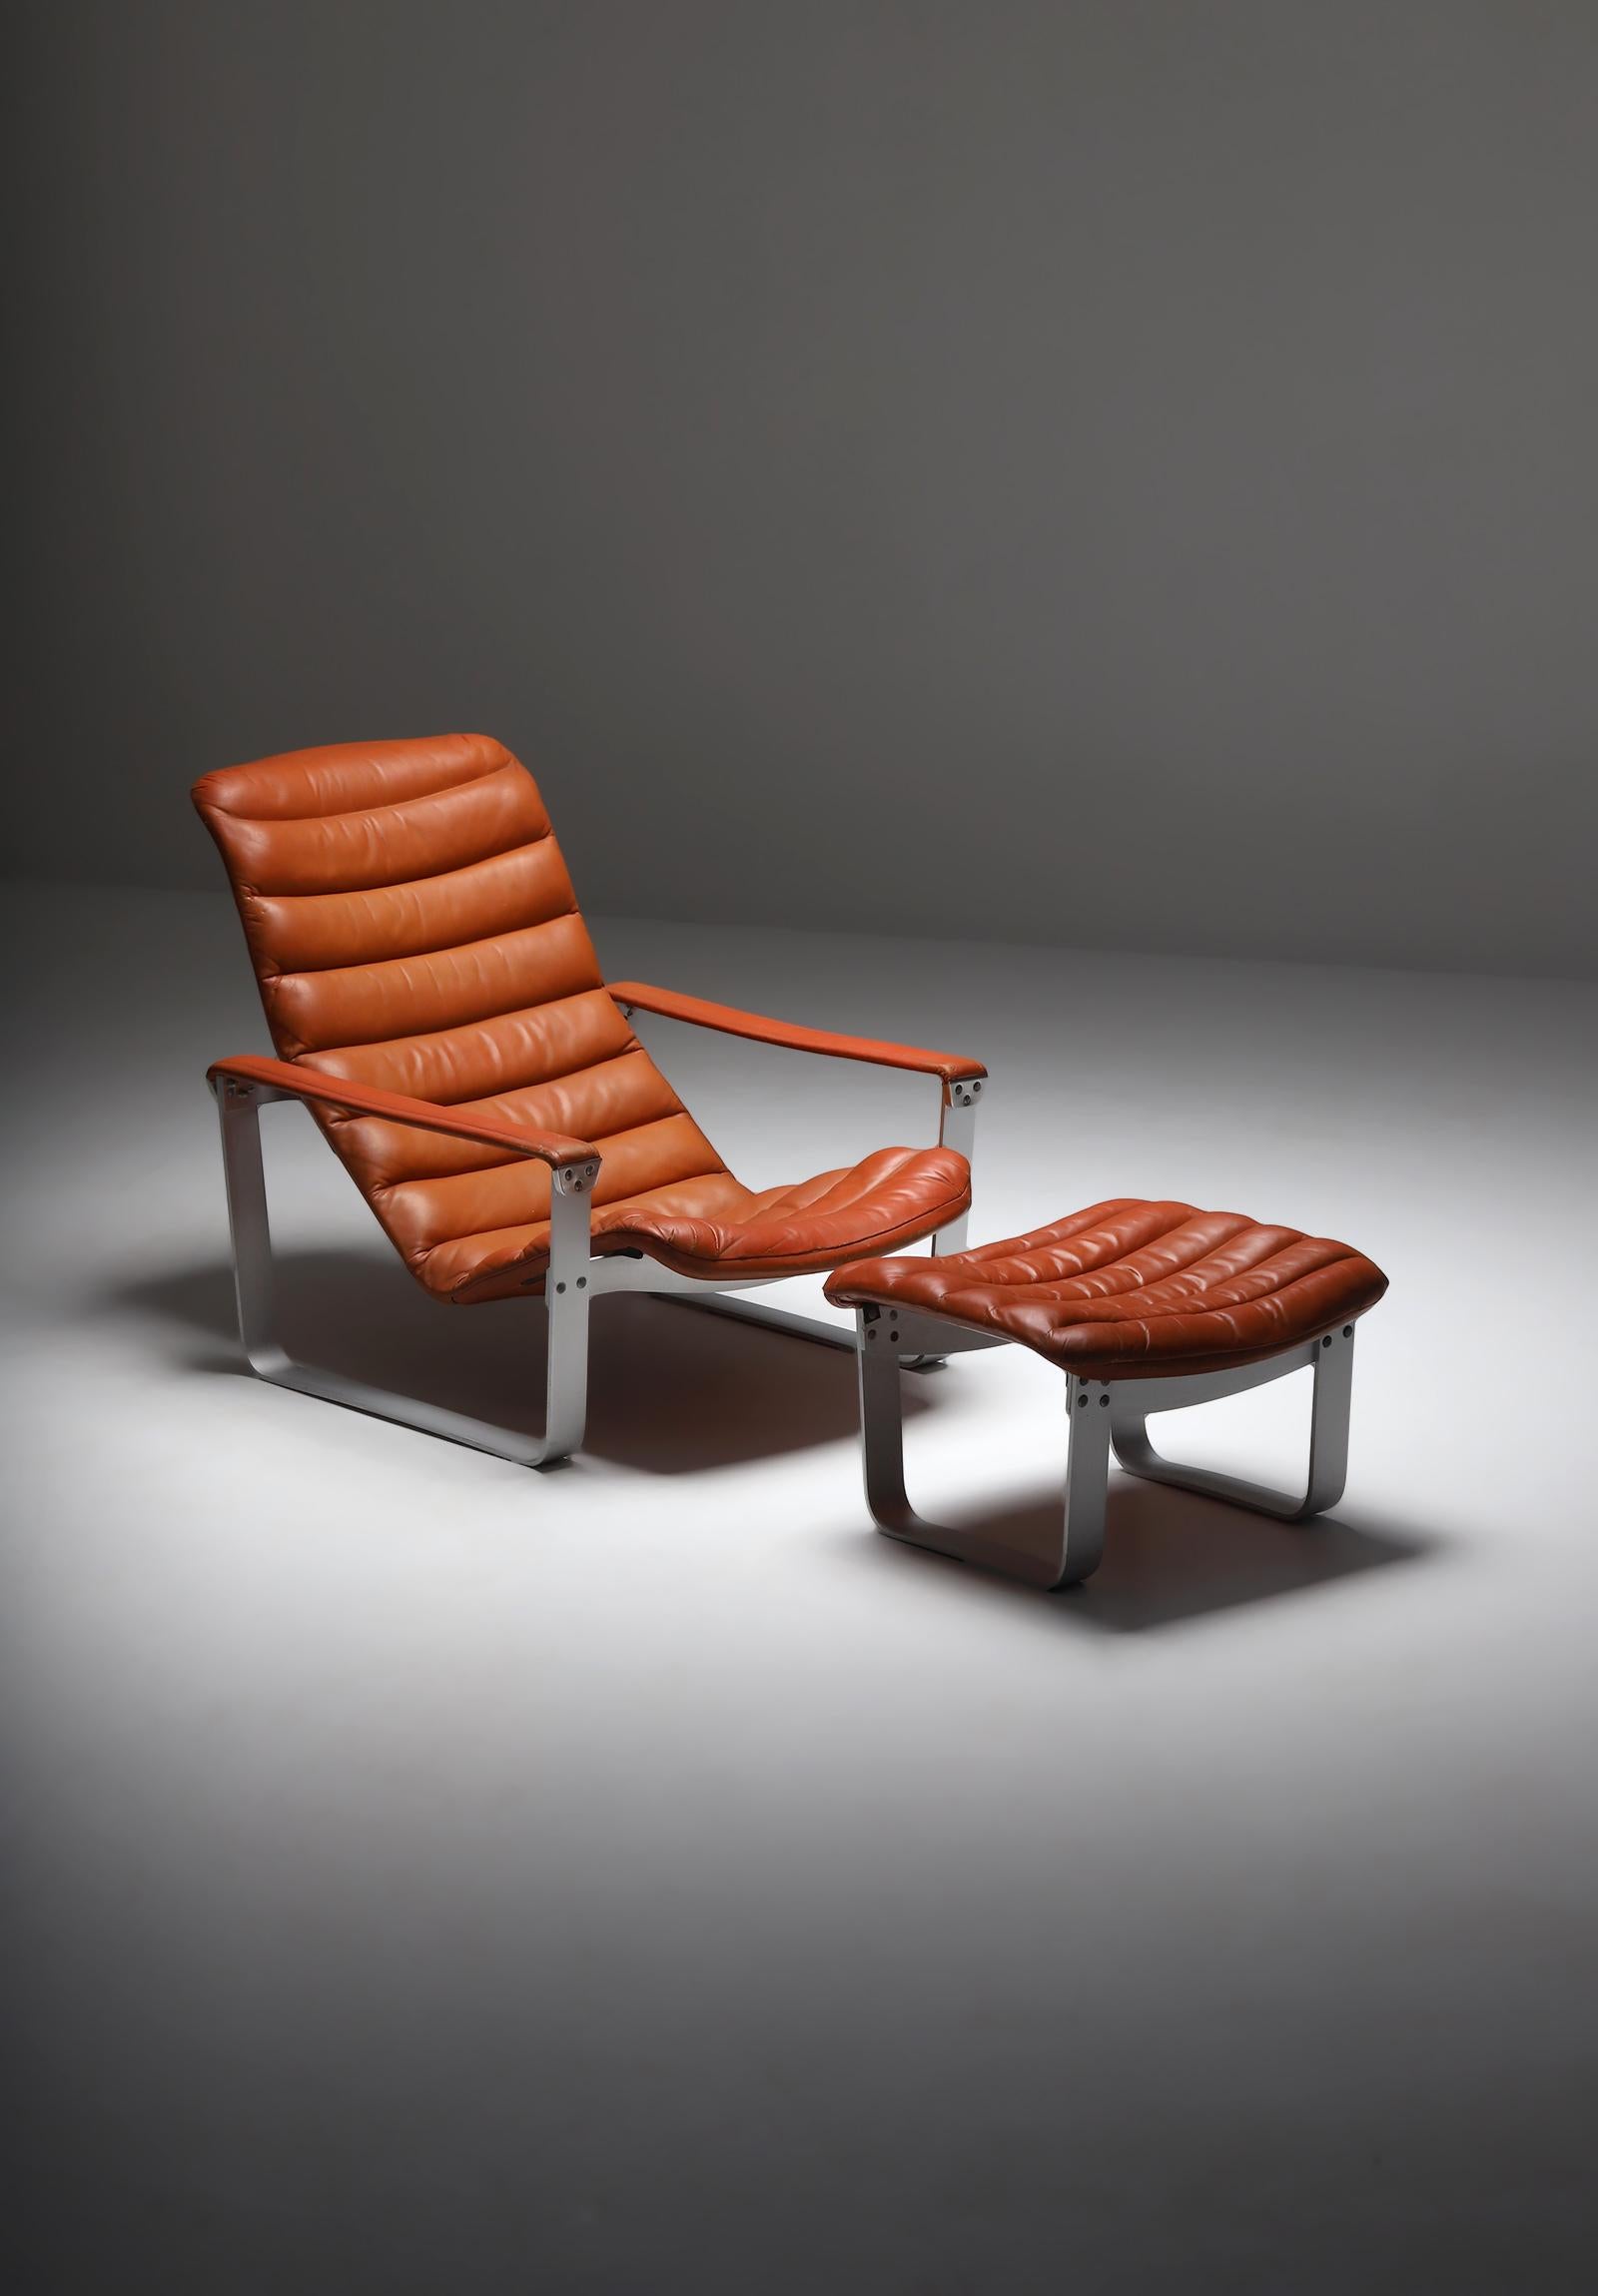 European Lounge Chair with Ottoman Designed by Ilmari Lappalainen for Asko 1960s